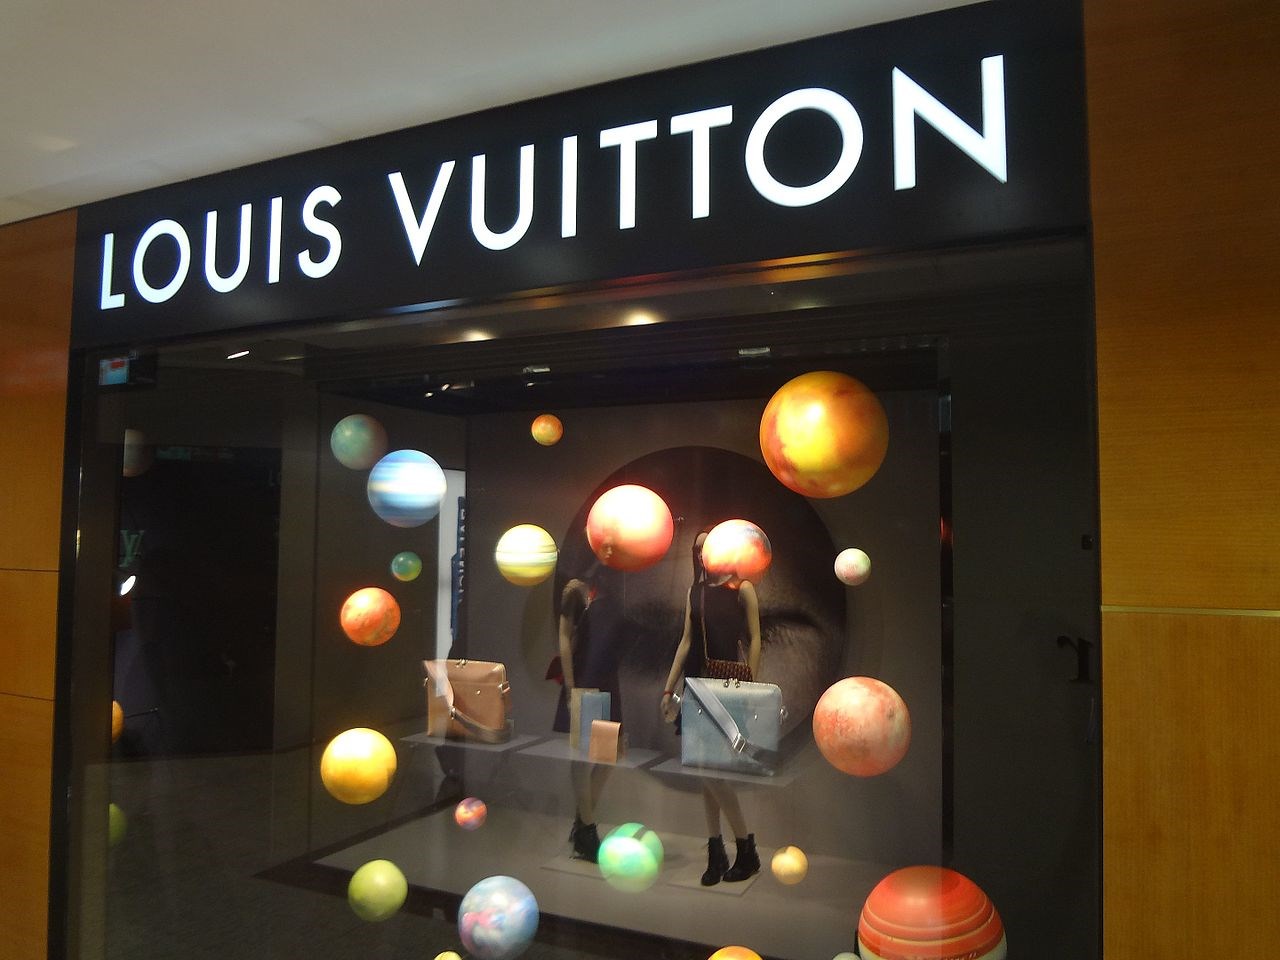 Louis Vuitton dazzles with 11-piece homeware, furniture and